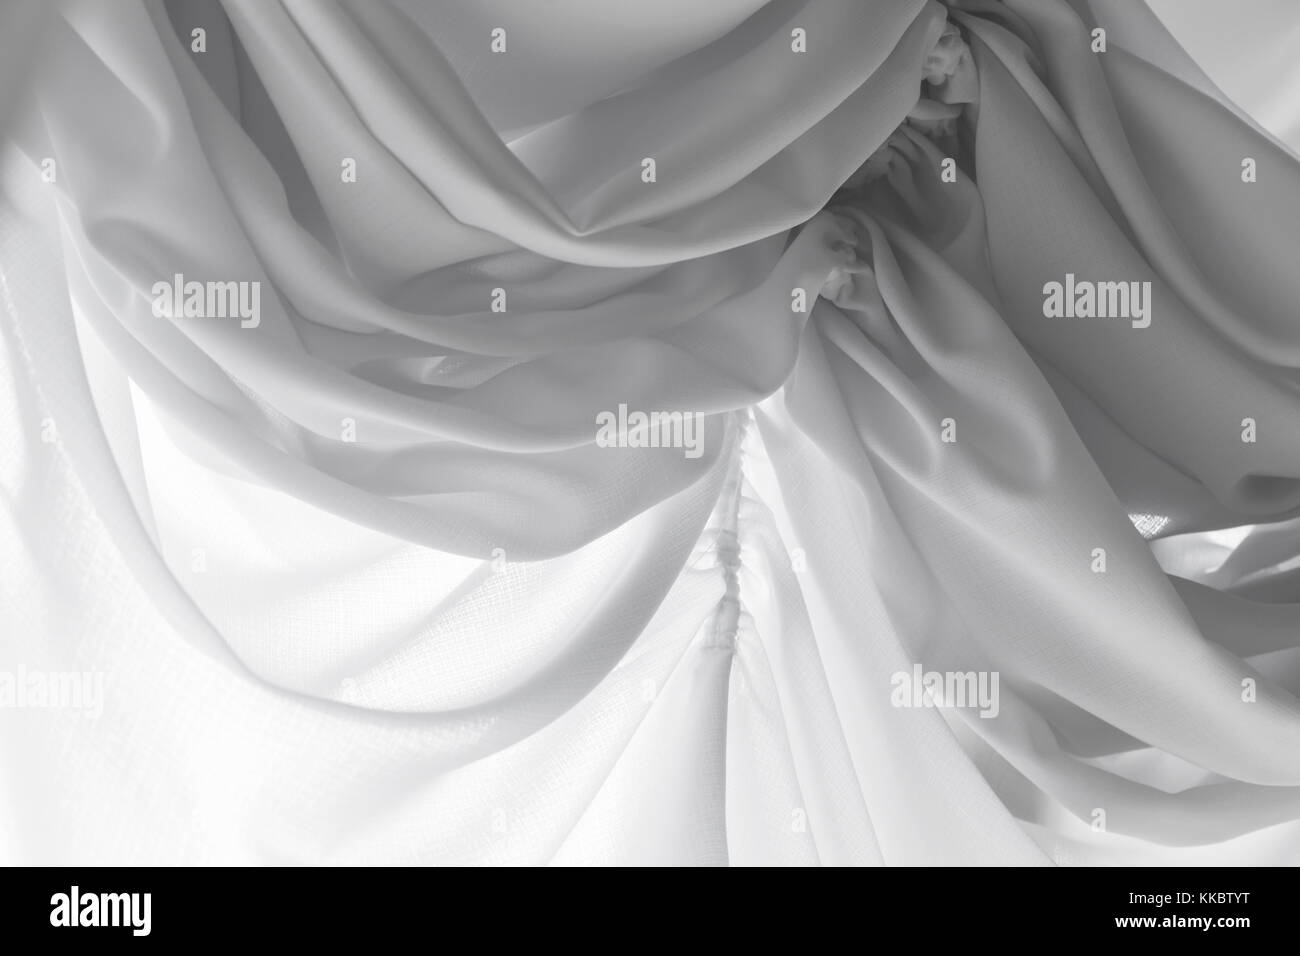 Background texture of white, airy stripes of chiffon fabric, tulle. Neutral  colors. Stock Photo by Jpavaliuk